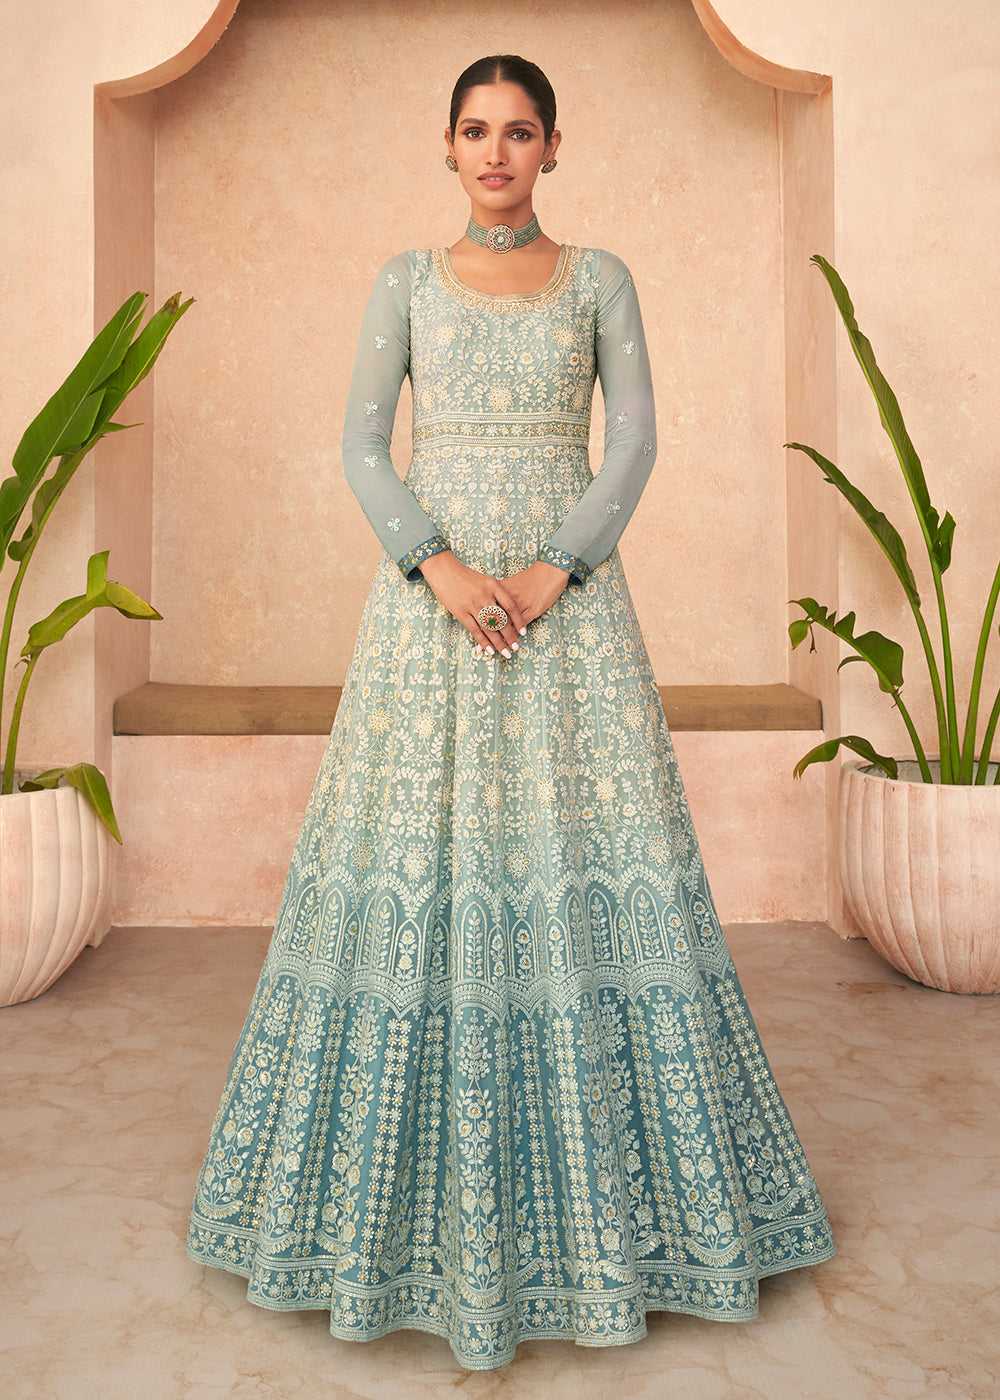 Buy Now Superb Teal Blue Embroidered Real Georgette Wedding Anarkali Suit Online in USA, UK, Australia, New Zealand, Canada & Worldwide at Empress Clothing. 